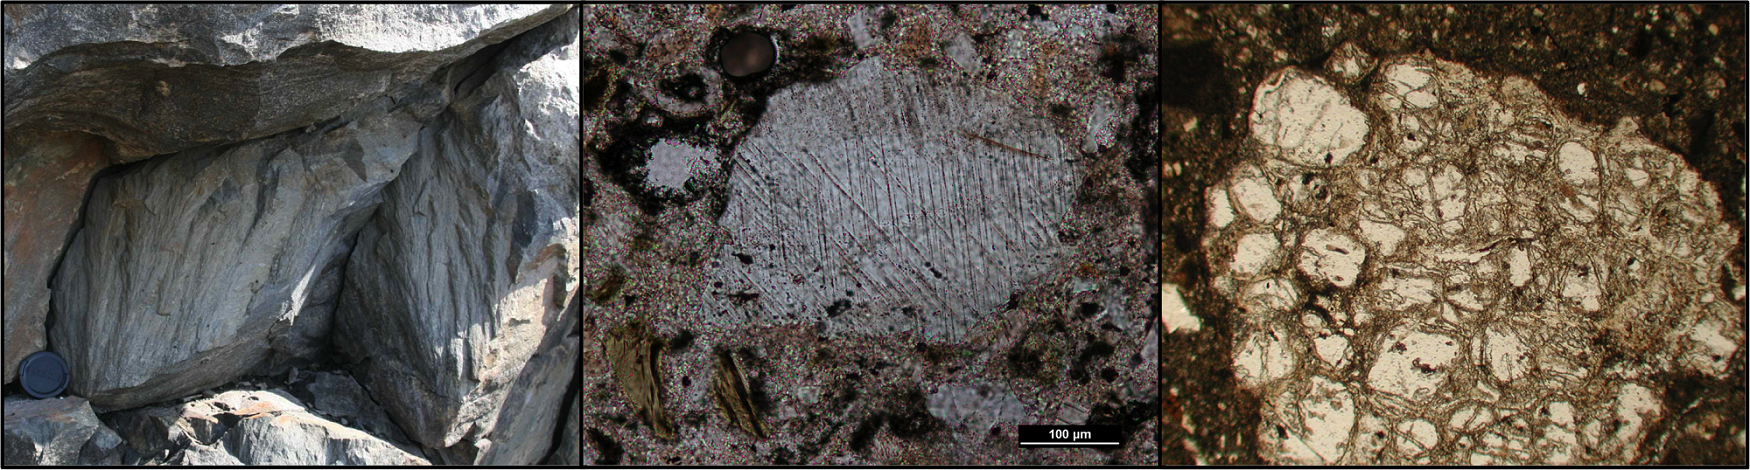 Examples of shocked rocks from various impact structures. (Left) A shattercone in an outcrop in Sudbury. (Centre) A microscopic image of Planar Deformation features in a quartz grain (parallel thin lines). (Right) A microscopic image of diapletic glass. Though you can still see the individual grain boundaries, the minerals are now glass.